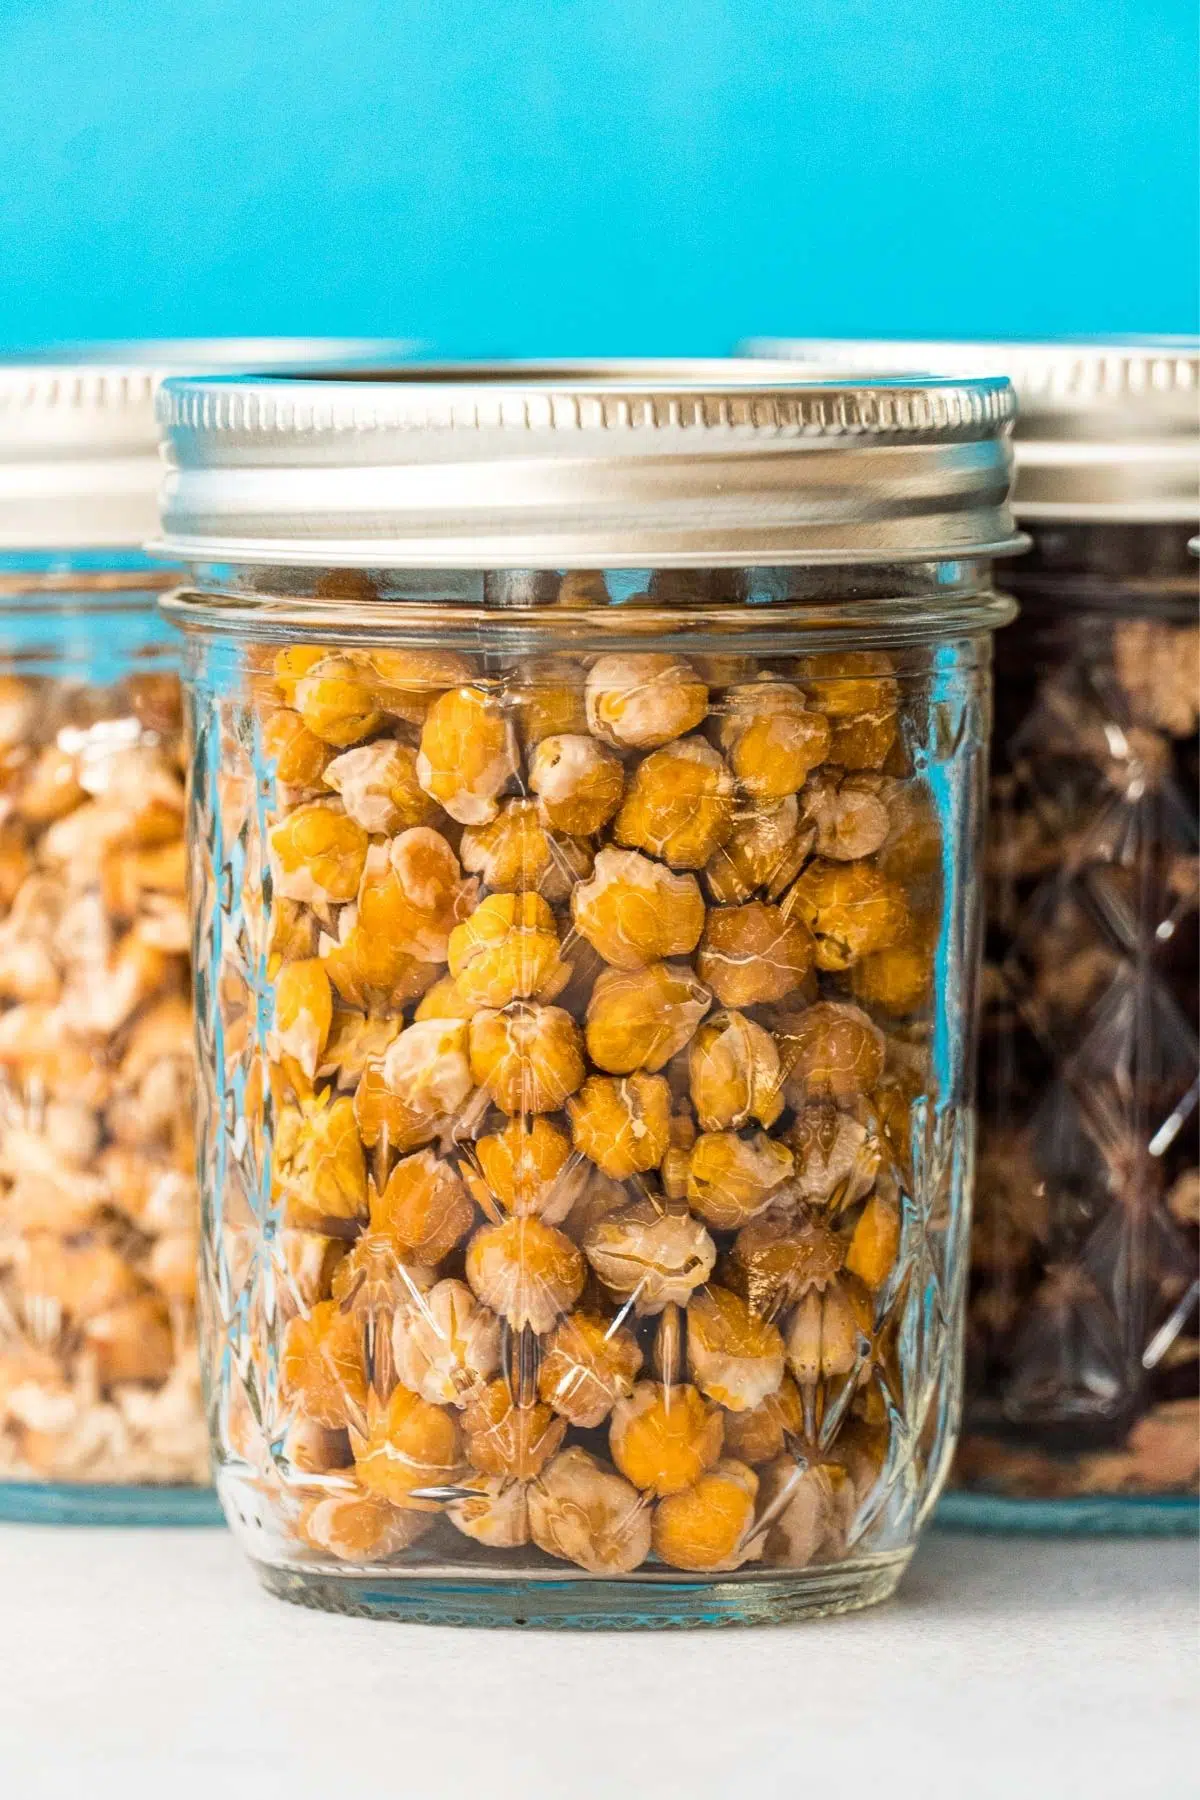 Dehydrated chickpeas in a glass jar